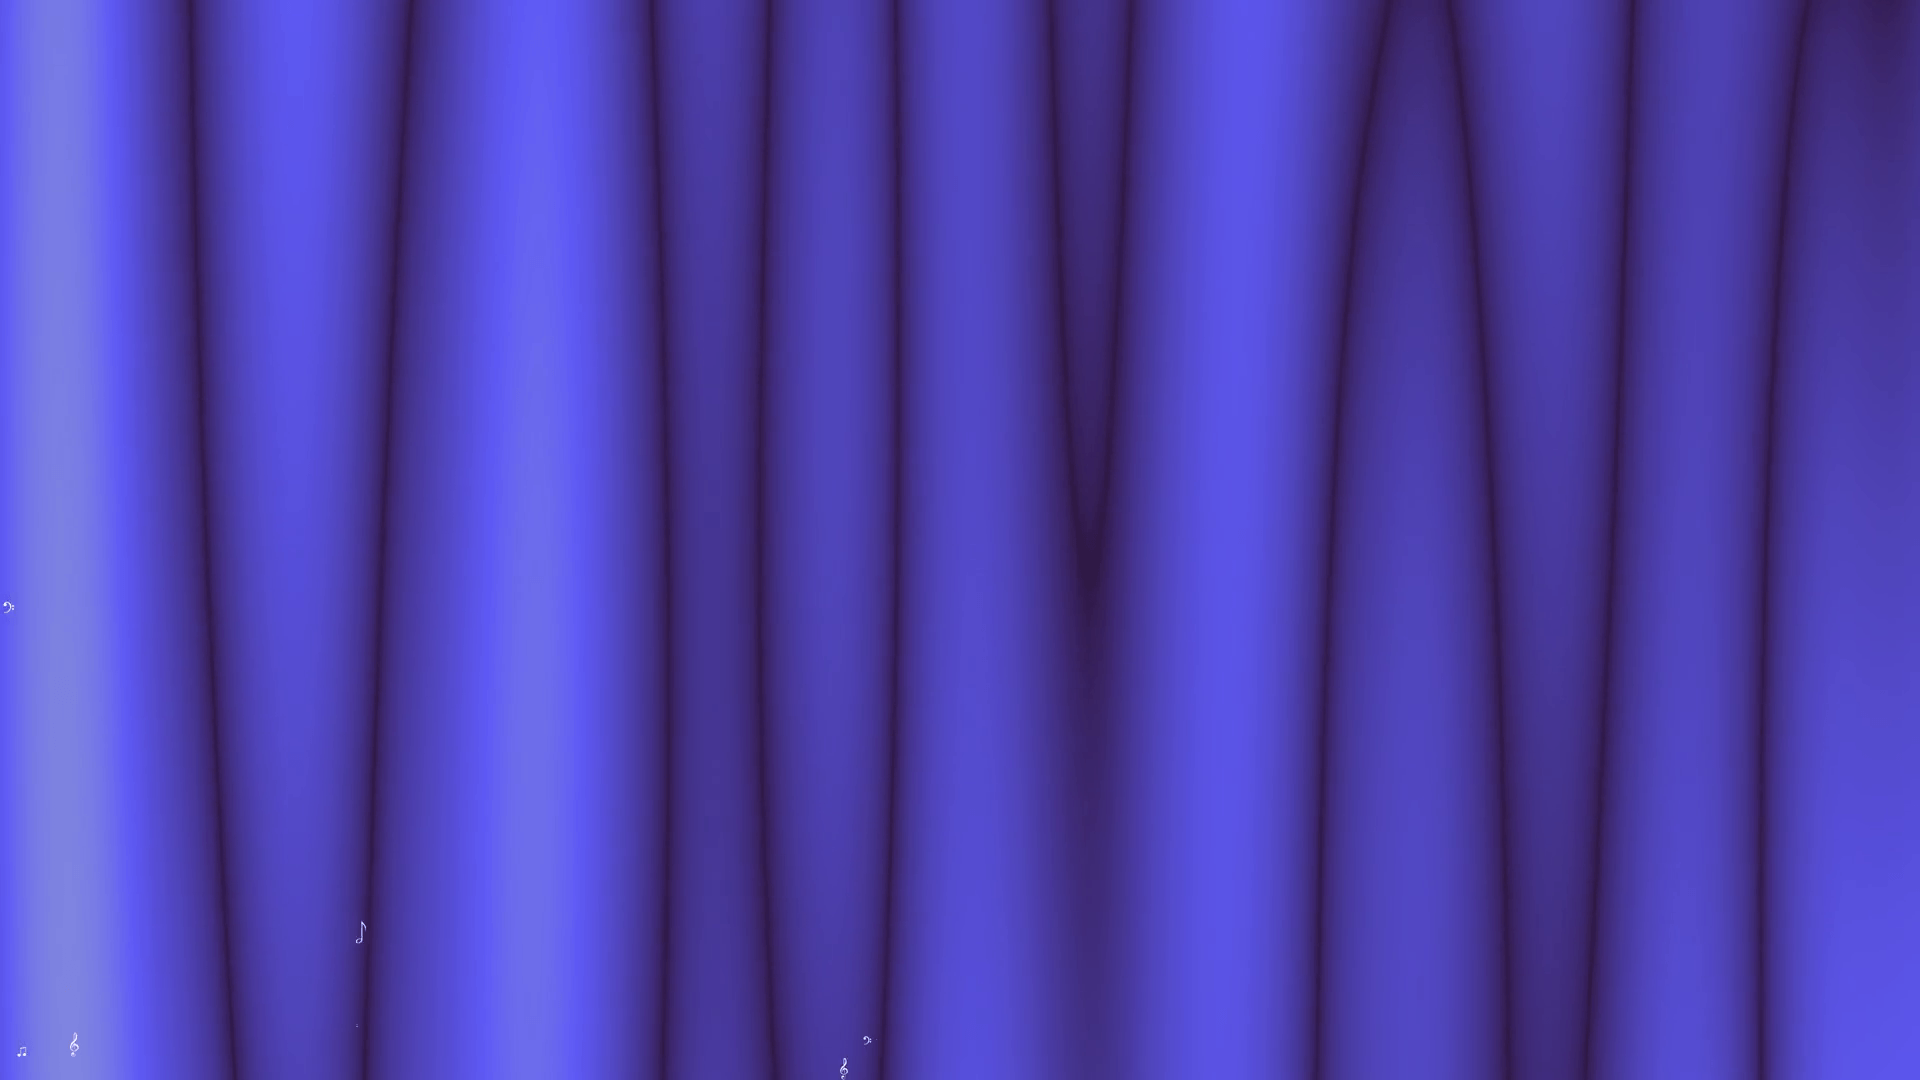 Animated dynamic background with music notes and marks on